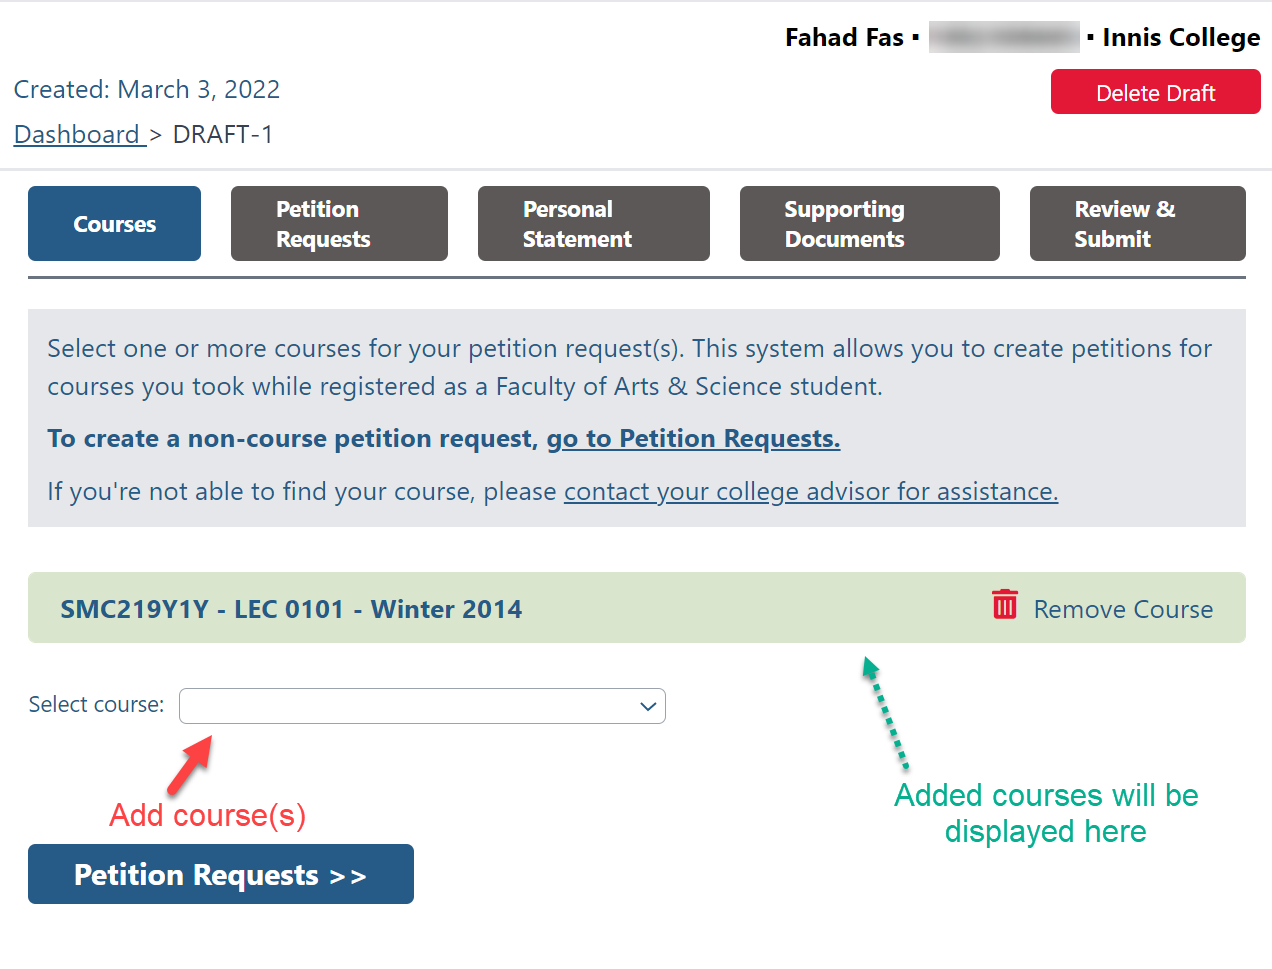 Screenshot of online petitions system showing how to add courses